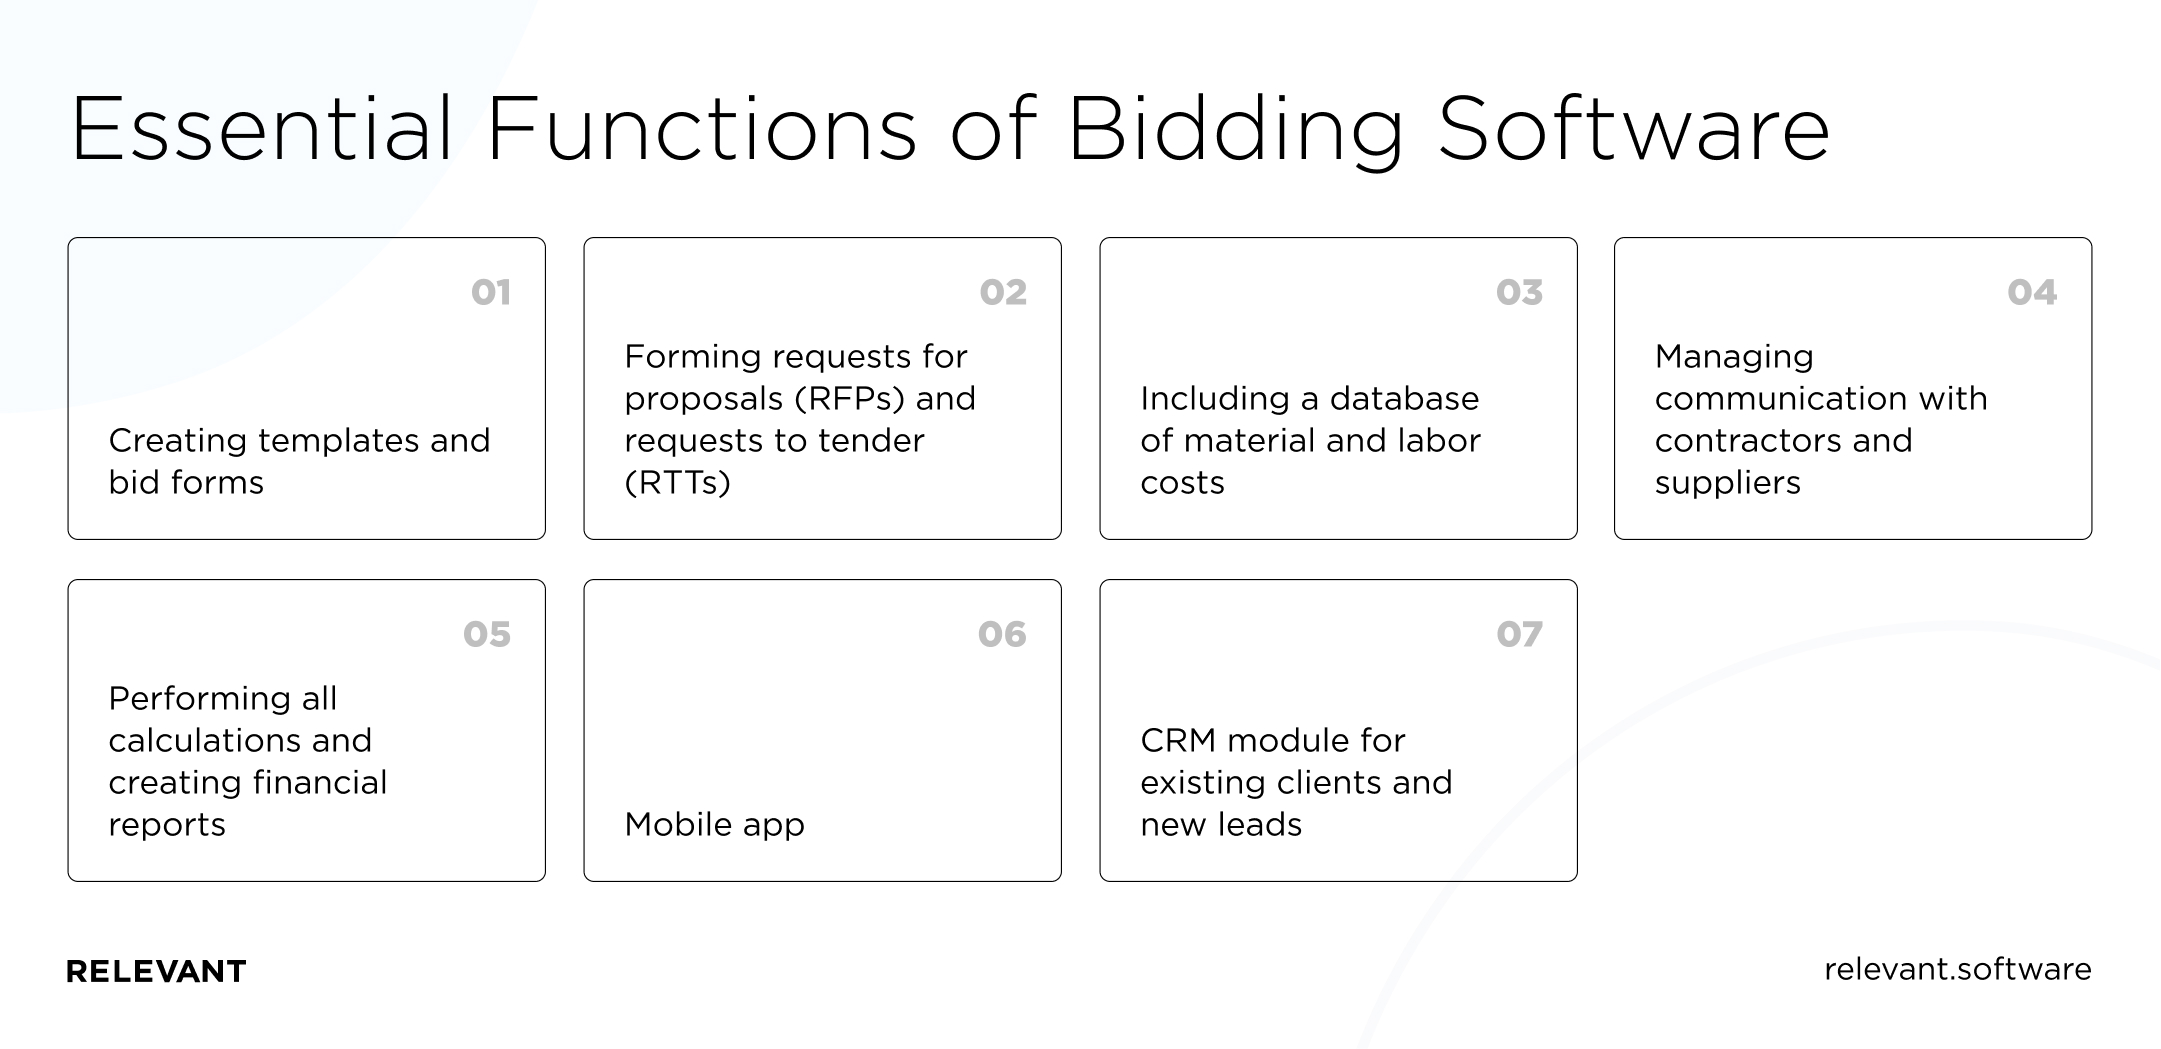 Essential Functions of Bidding Software